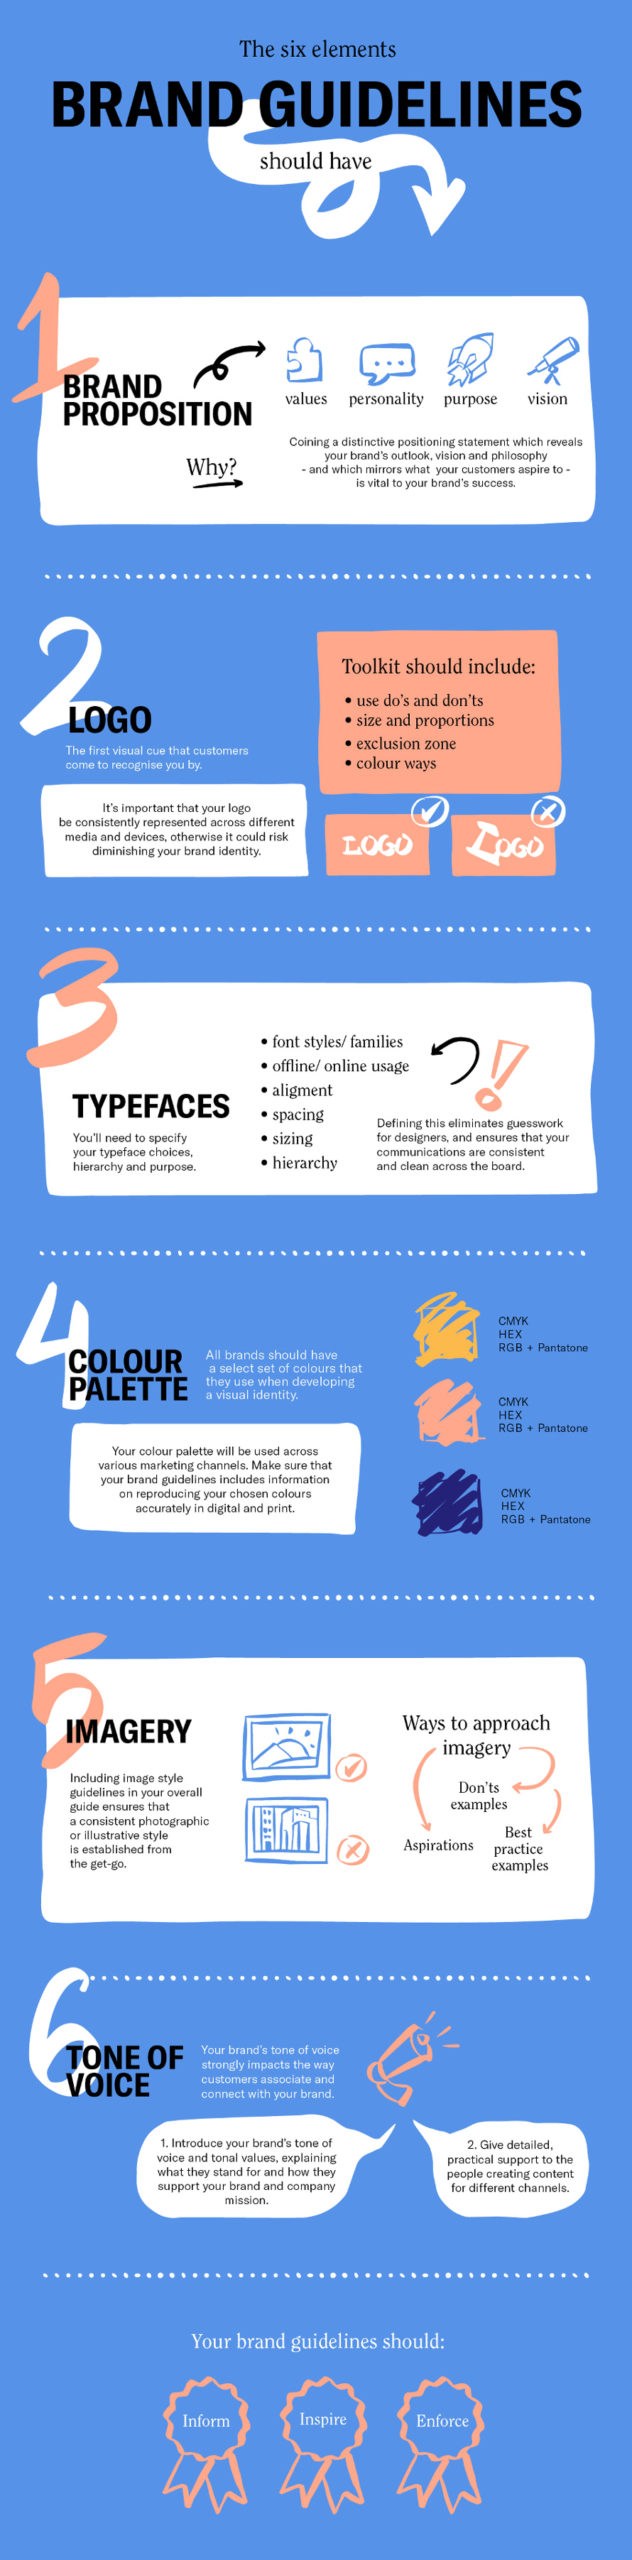 Elements of brand guidelines infographic.